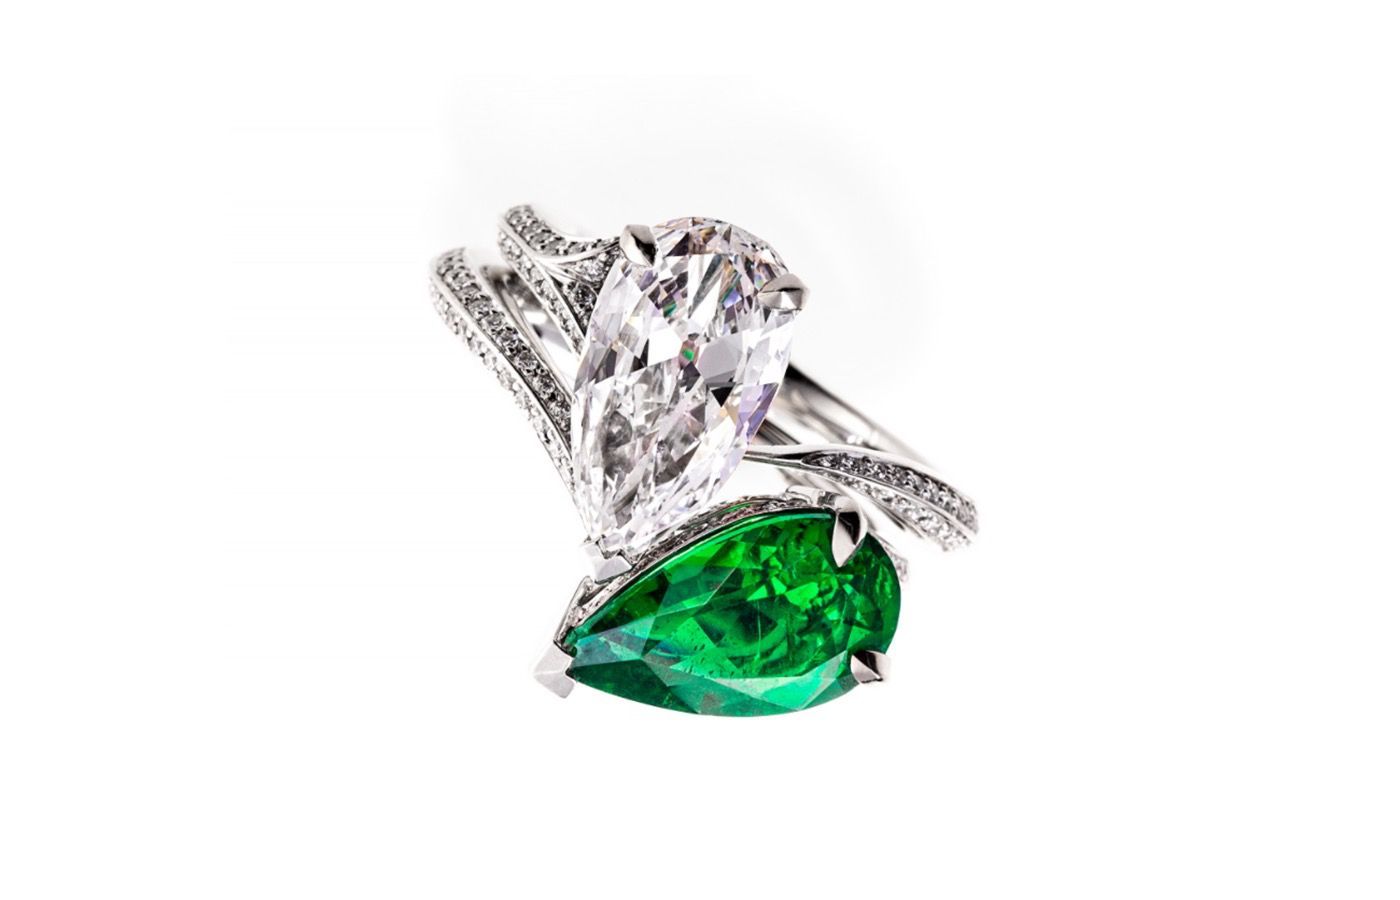 Stephen Webster white gold, diamond and untreated Colombian emerald bespoke ring designed for Machine Gun Kelly & Megan Fox